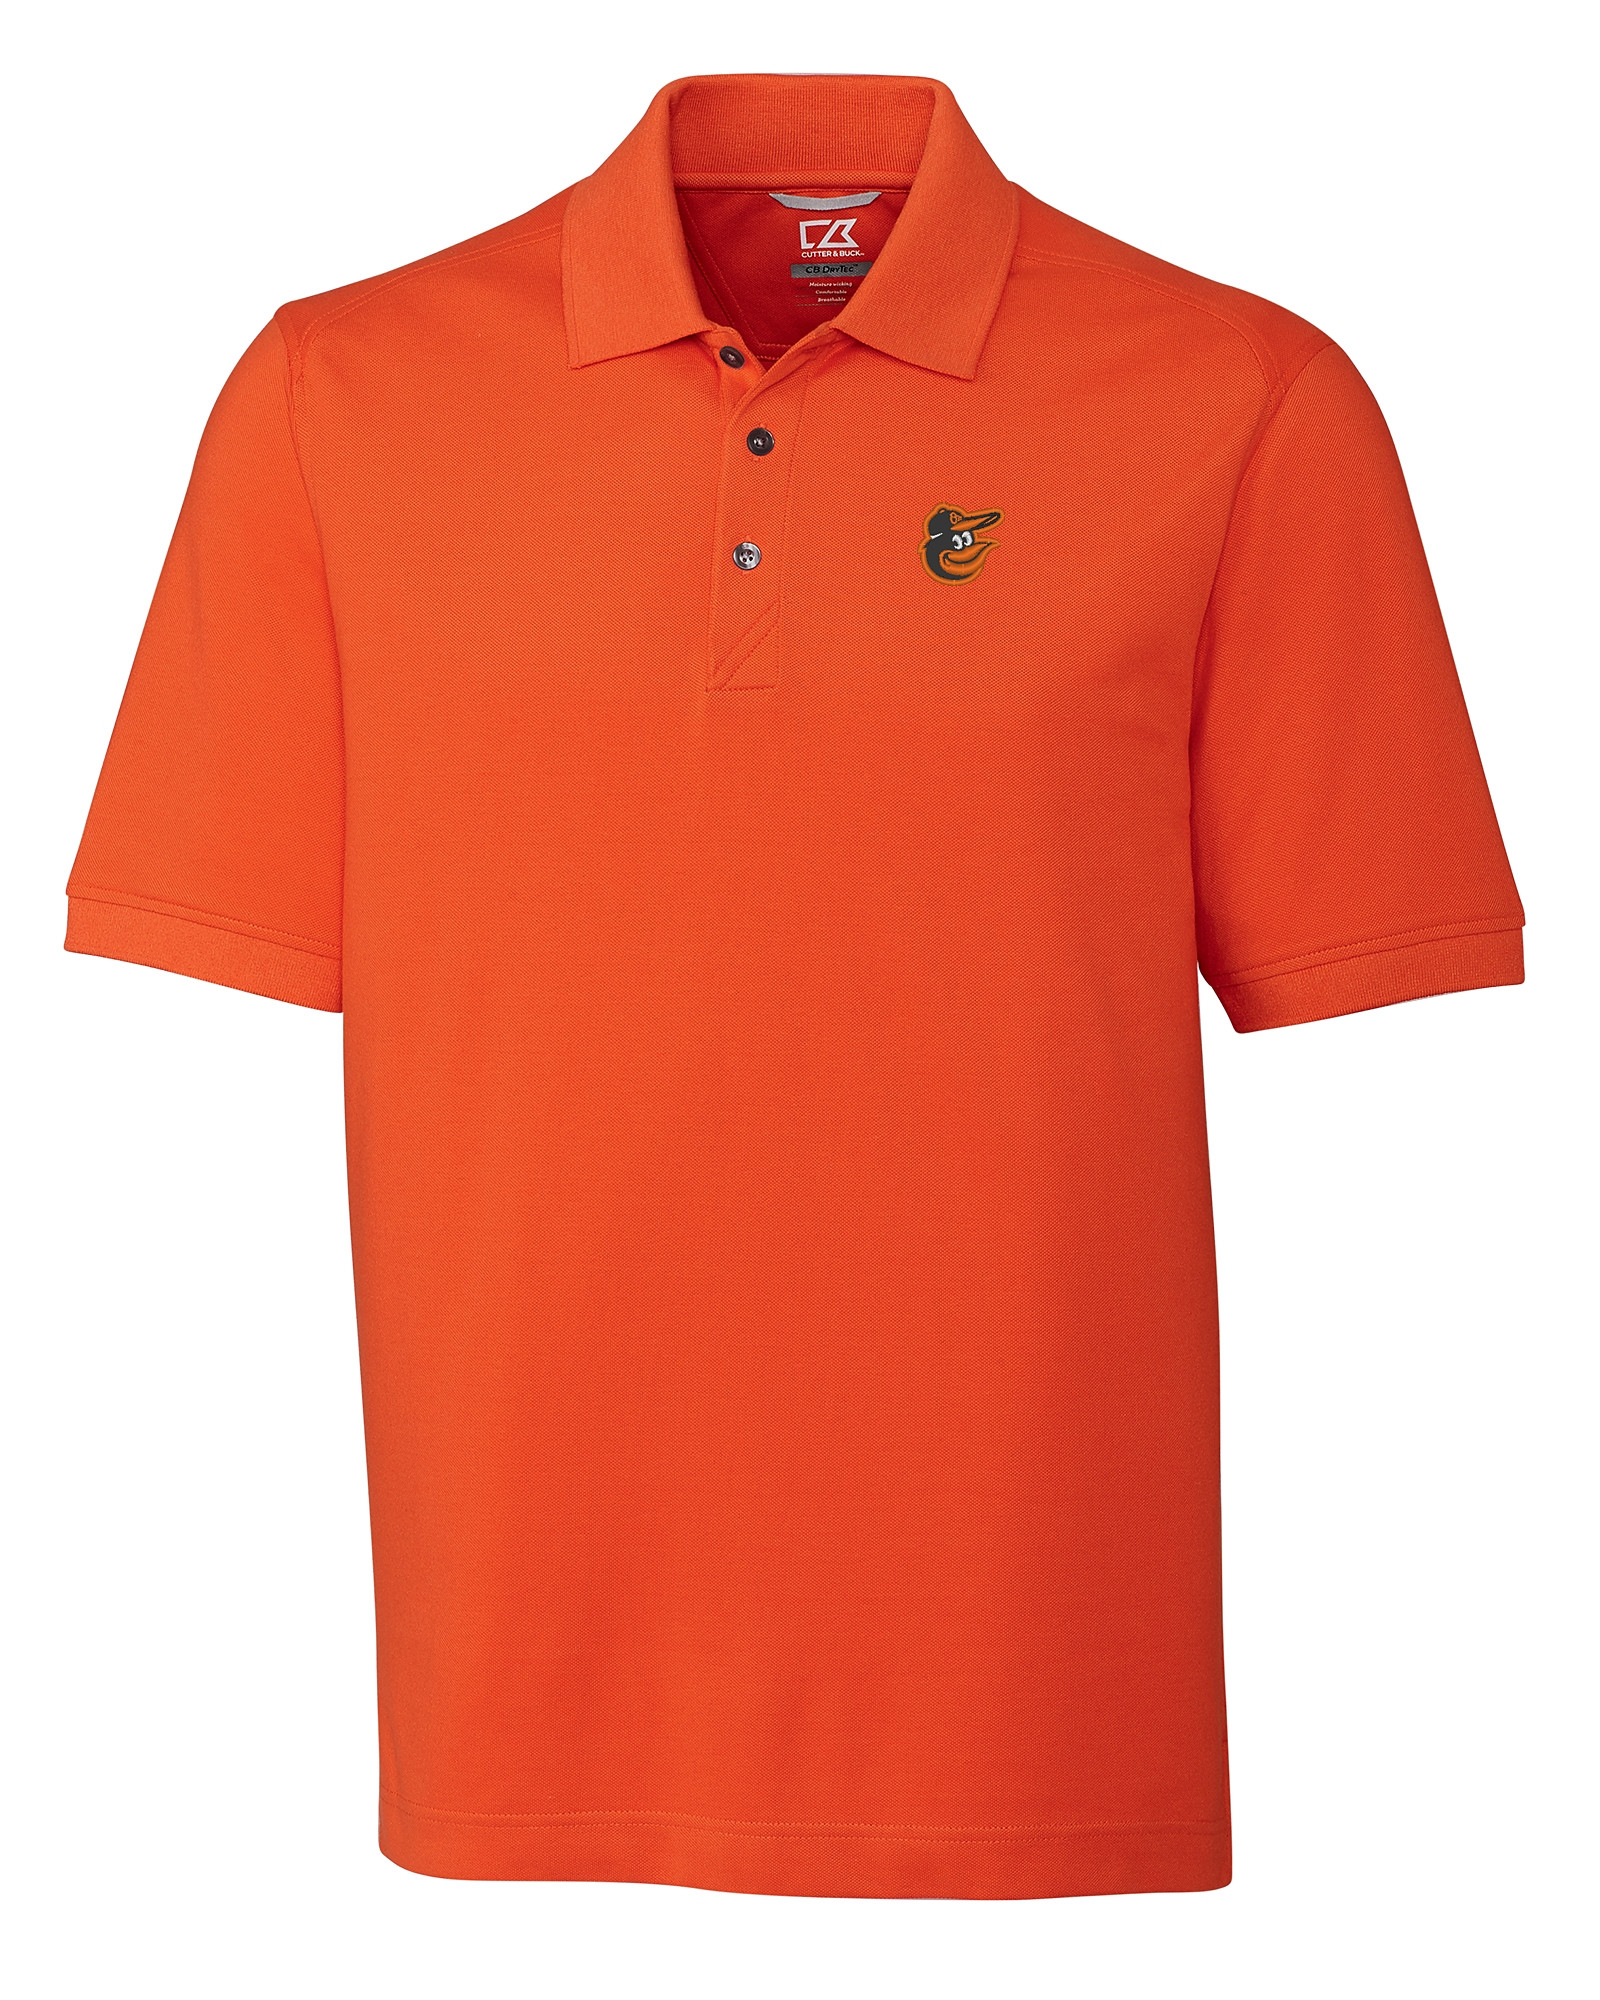 Baltimore Orioles Nike Cooperstown Collection Polo - Orange